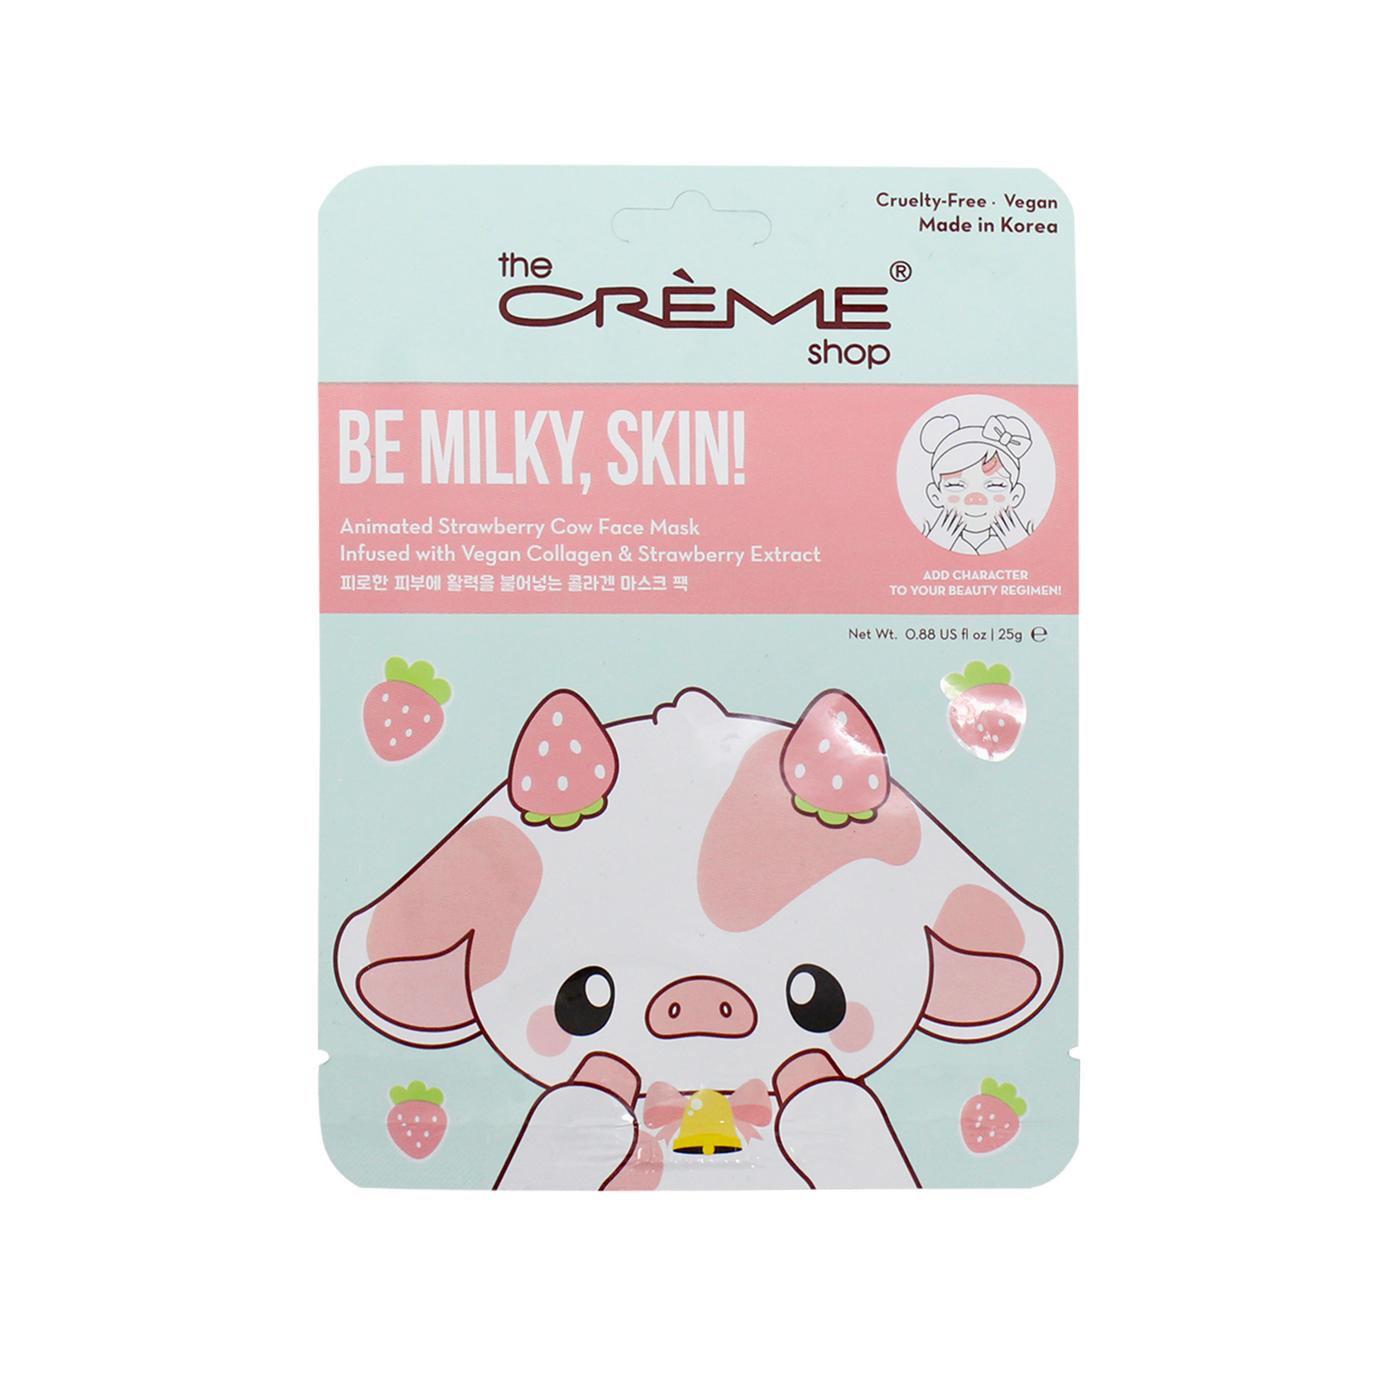 The Crème Shop Be Milky, Skin! Animated Strawberry Cow Face Mask; image 1 of 2